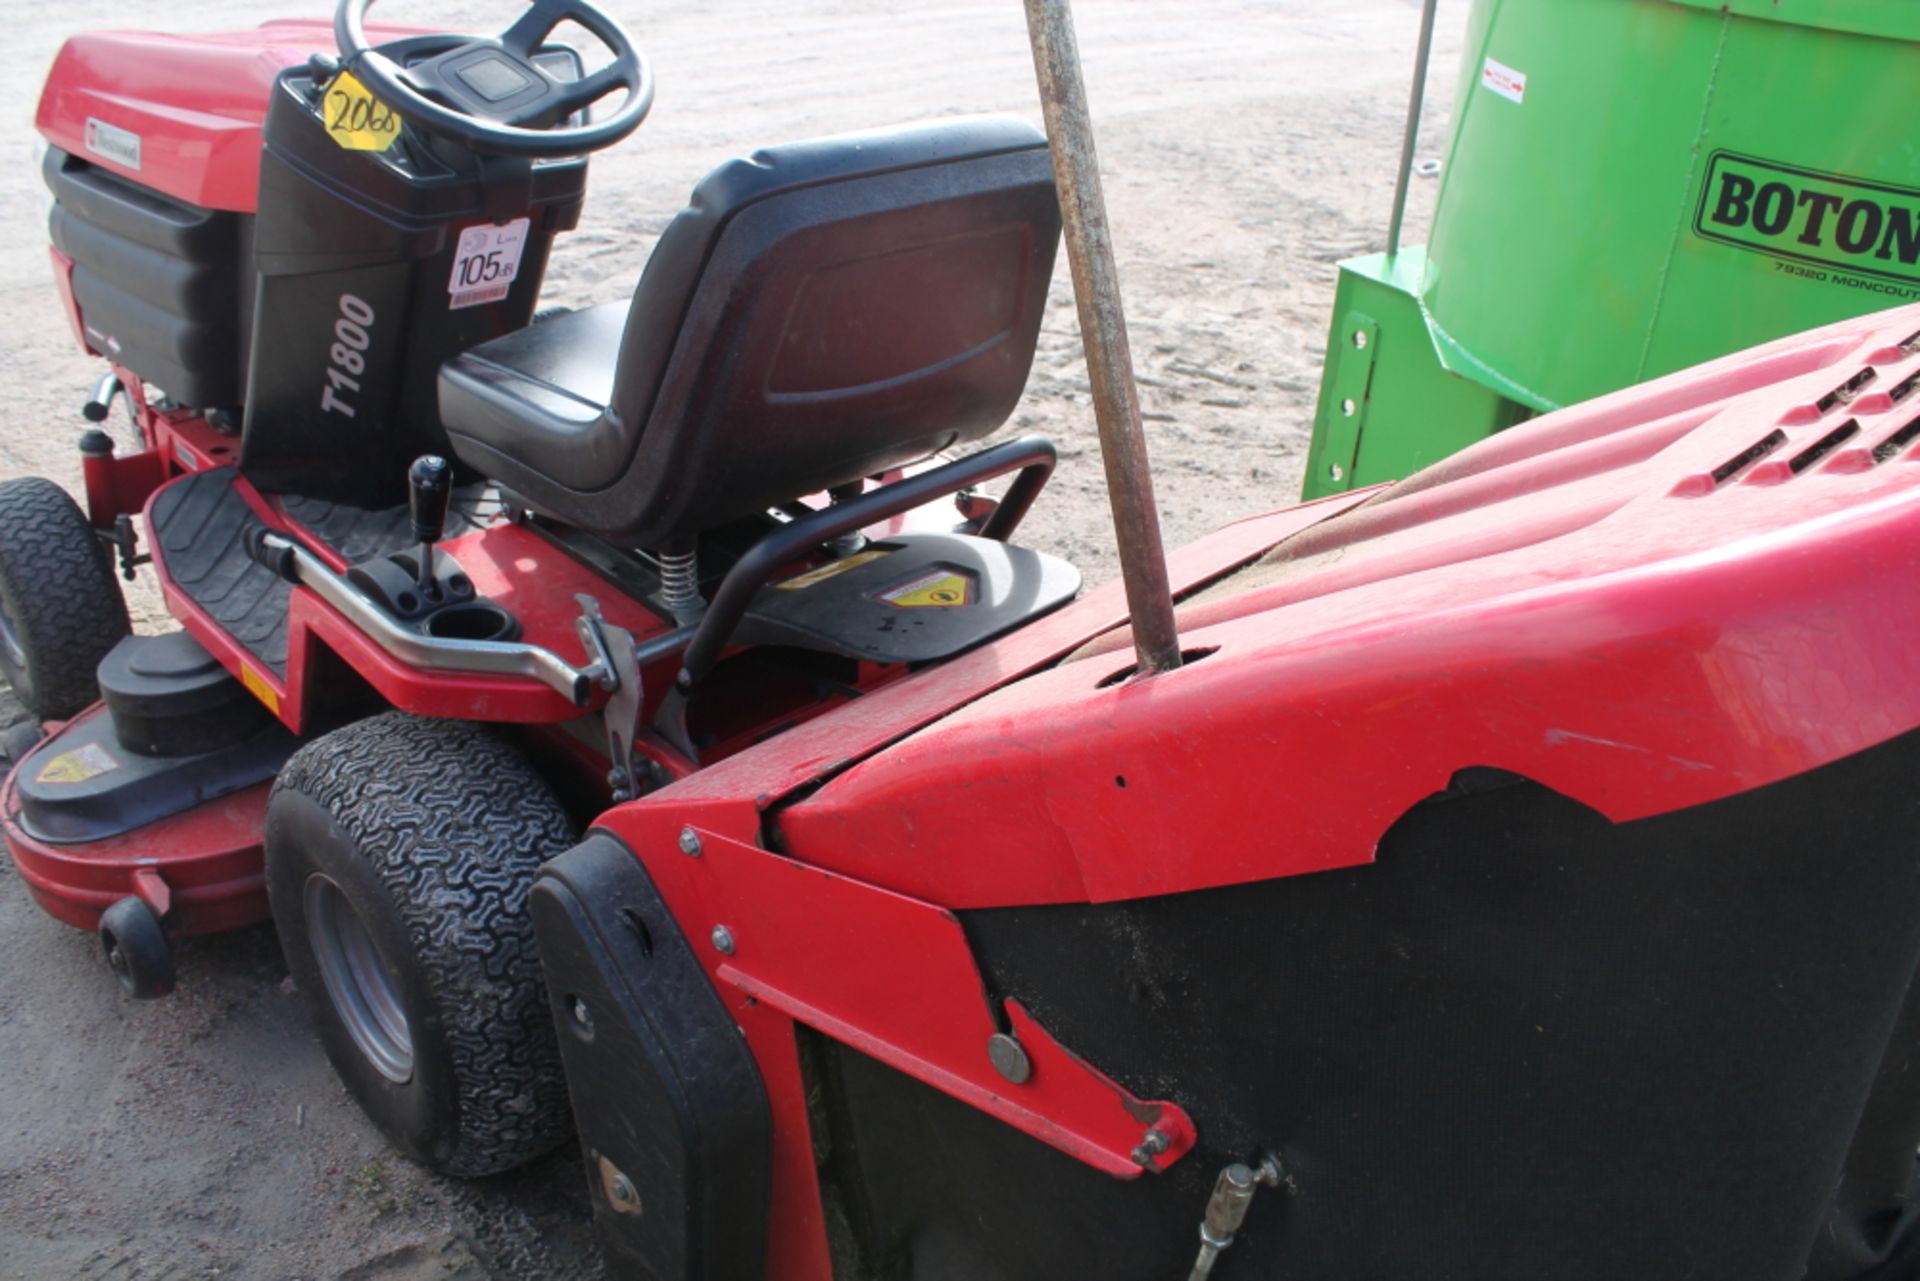 Sale Item:   WESTWOOD T1800 RIDE ON MOWER WITH COLLECTOR MANUAL IN P/CABIN   Vat Status:    No Vat - Image 3 of 3